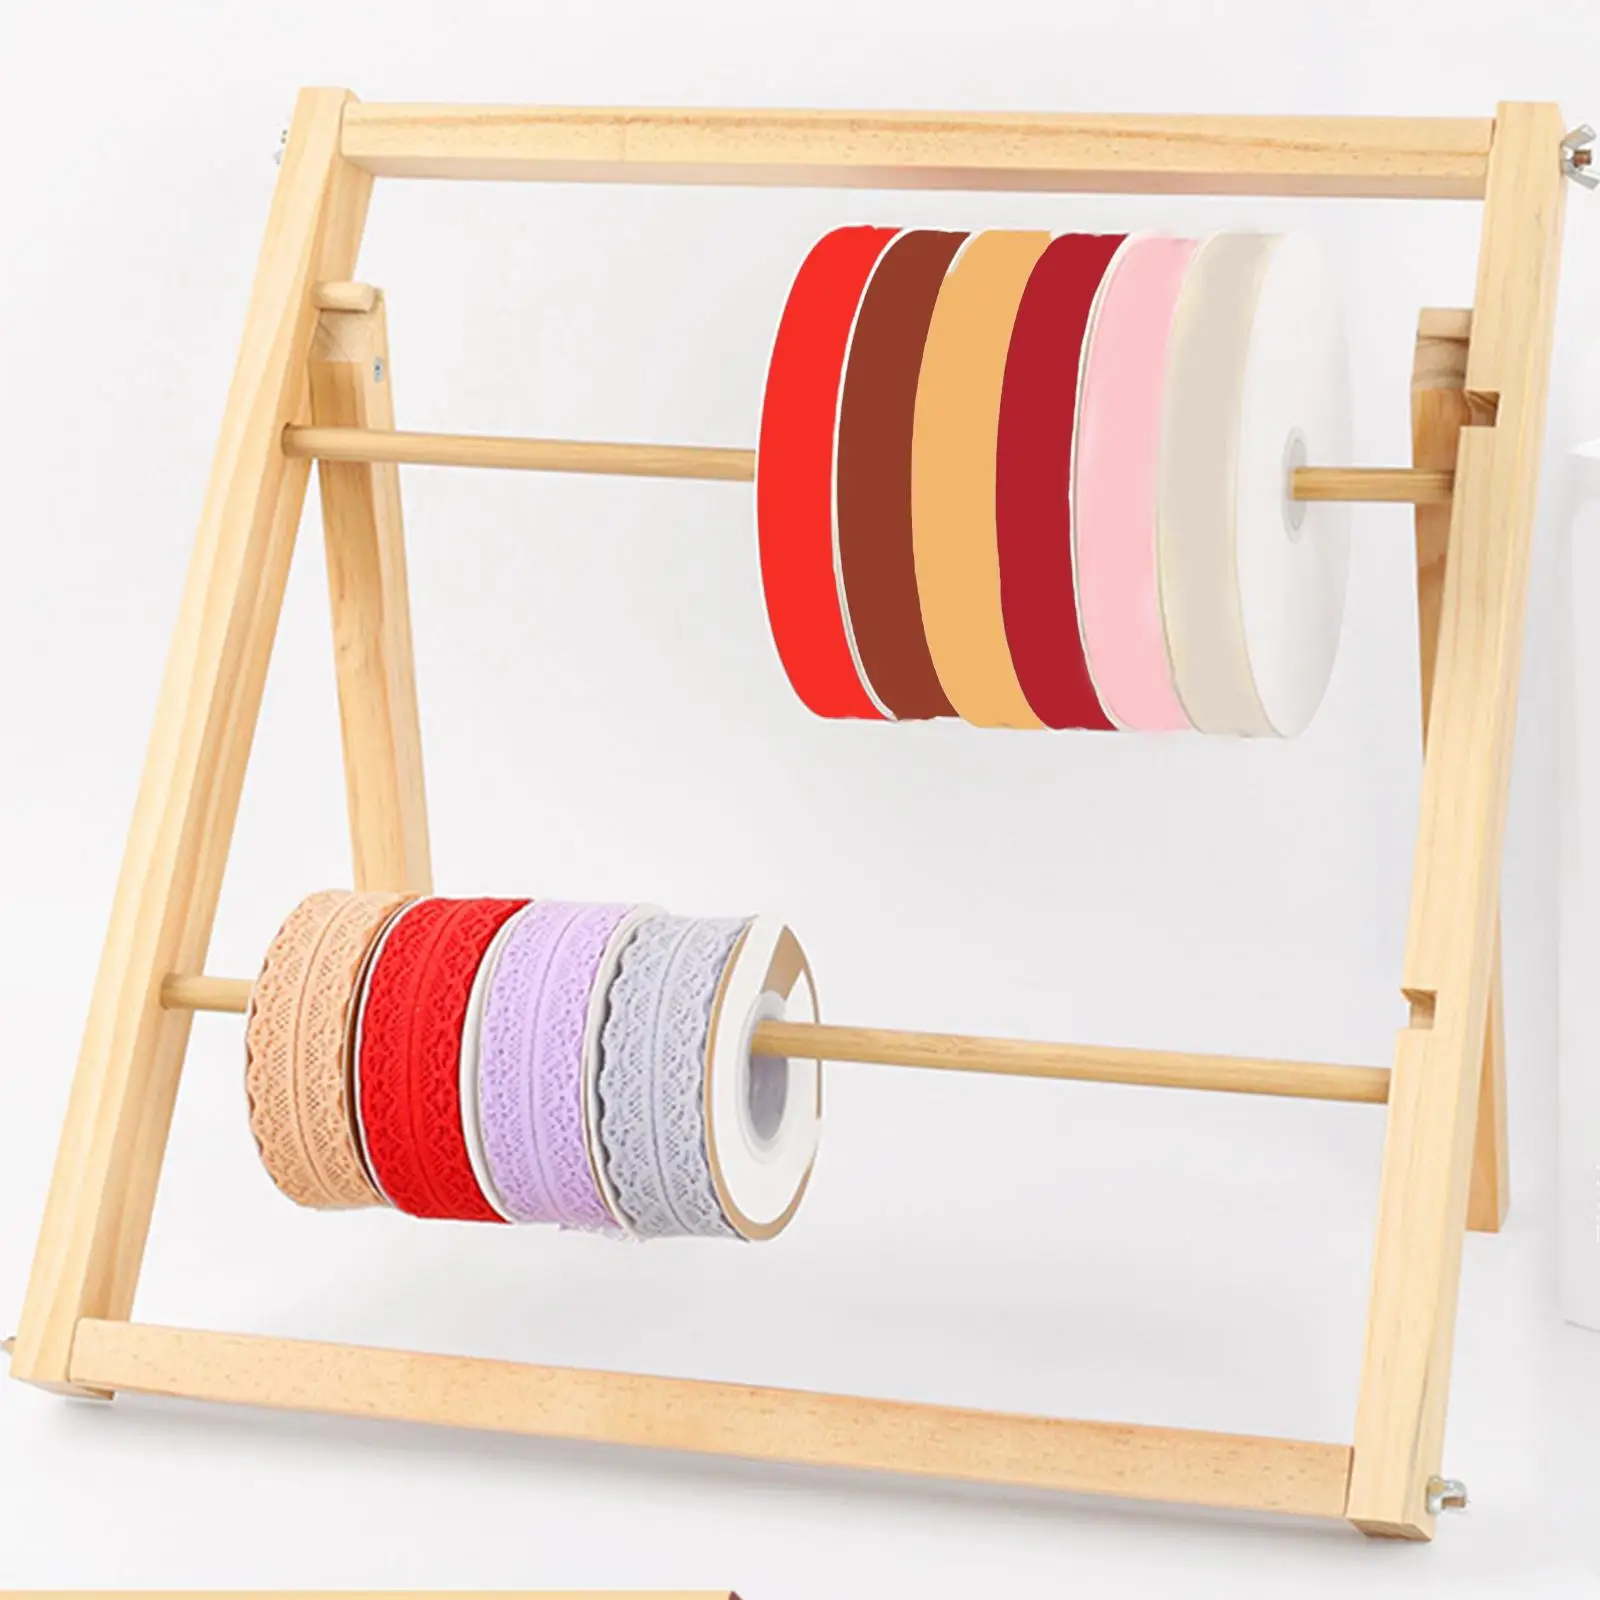 Wooden Ribbon Rack 2 Tier Decor Organizer Easy to Use Durable DIY Craft for Tabletop Braiding Hair Sewing Thread Spool Home